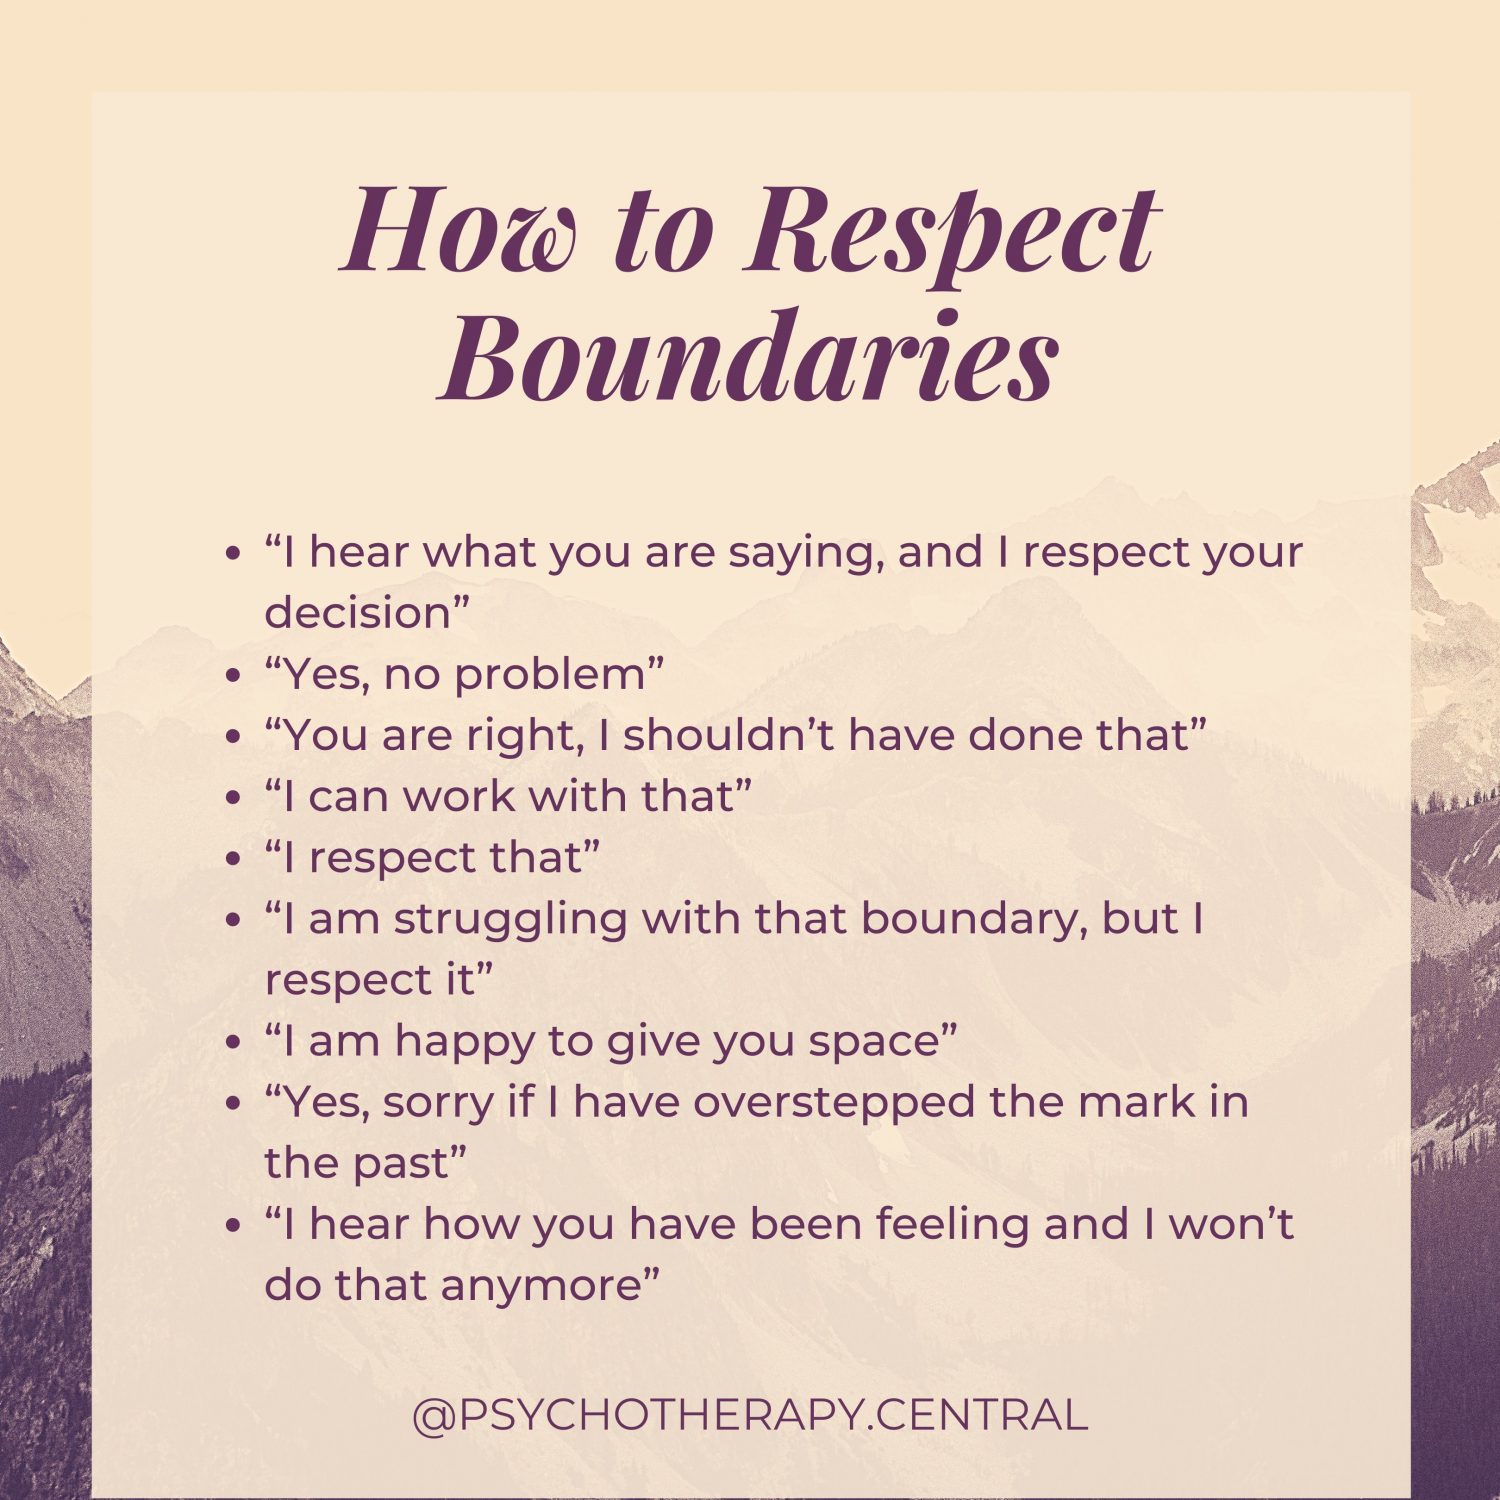 How to Respect Boundaries “I hear what you are saying, and I respect your decision” “Yes, no problem” “You are right, I shouldn’t have done that” “I can work with that” “I respect that” “I am struggling with that boundary, but I respect it” “I am happy to give you space” “Yes, sorry if I have overstepped the mark in the past” “I hear how you have been feeling and I won’t do that anymore”